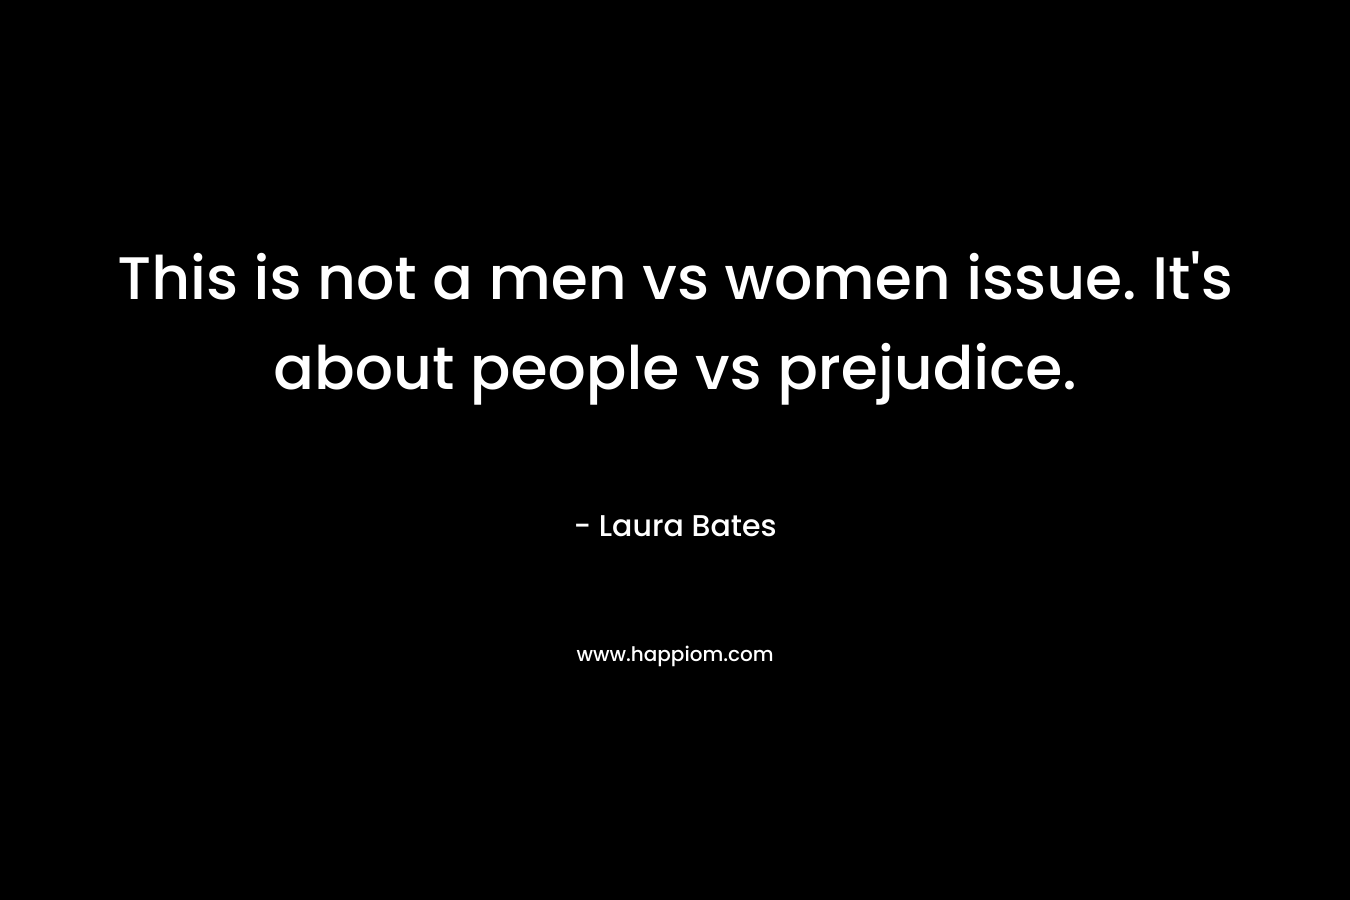 This is not a men vs women issue. It’s about people vs prejudice. – Laura Bates